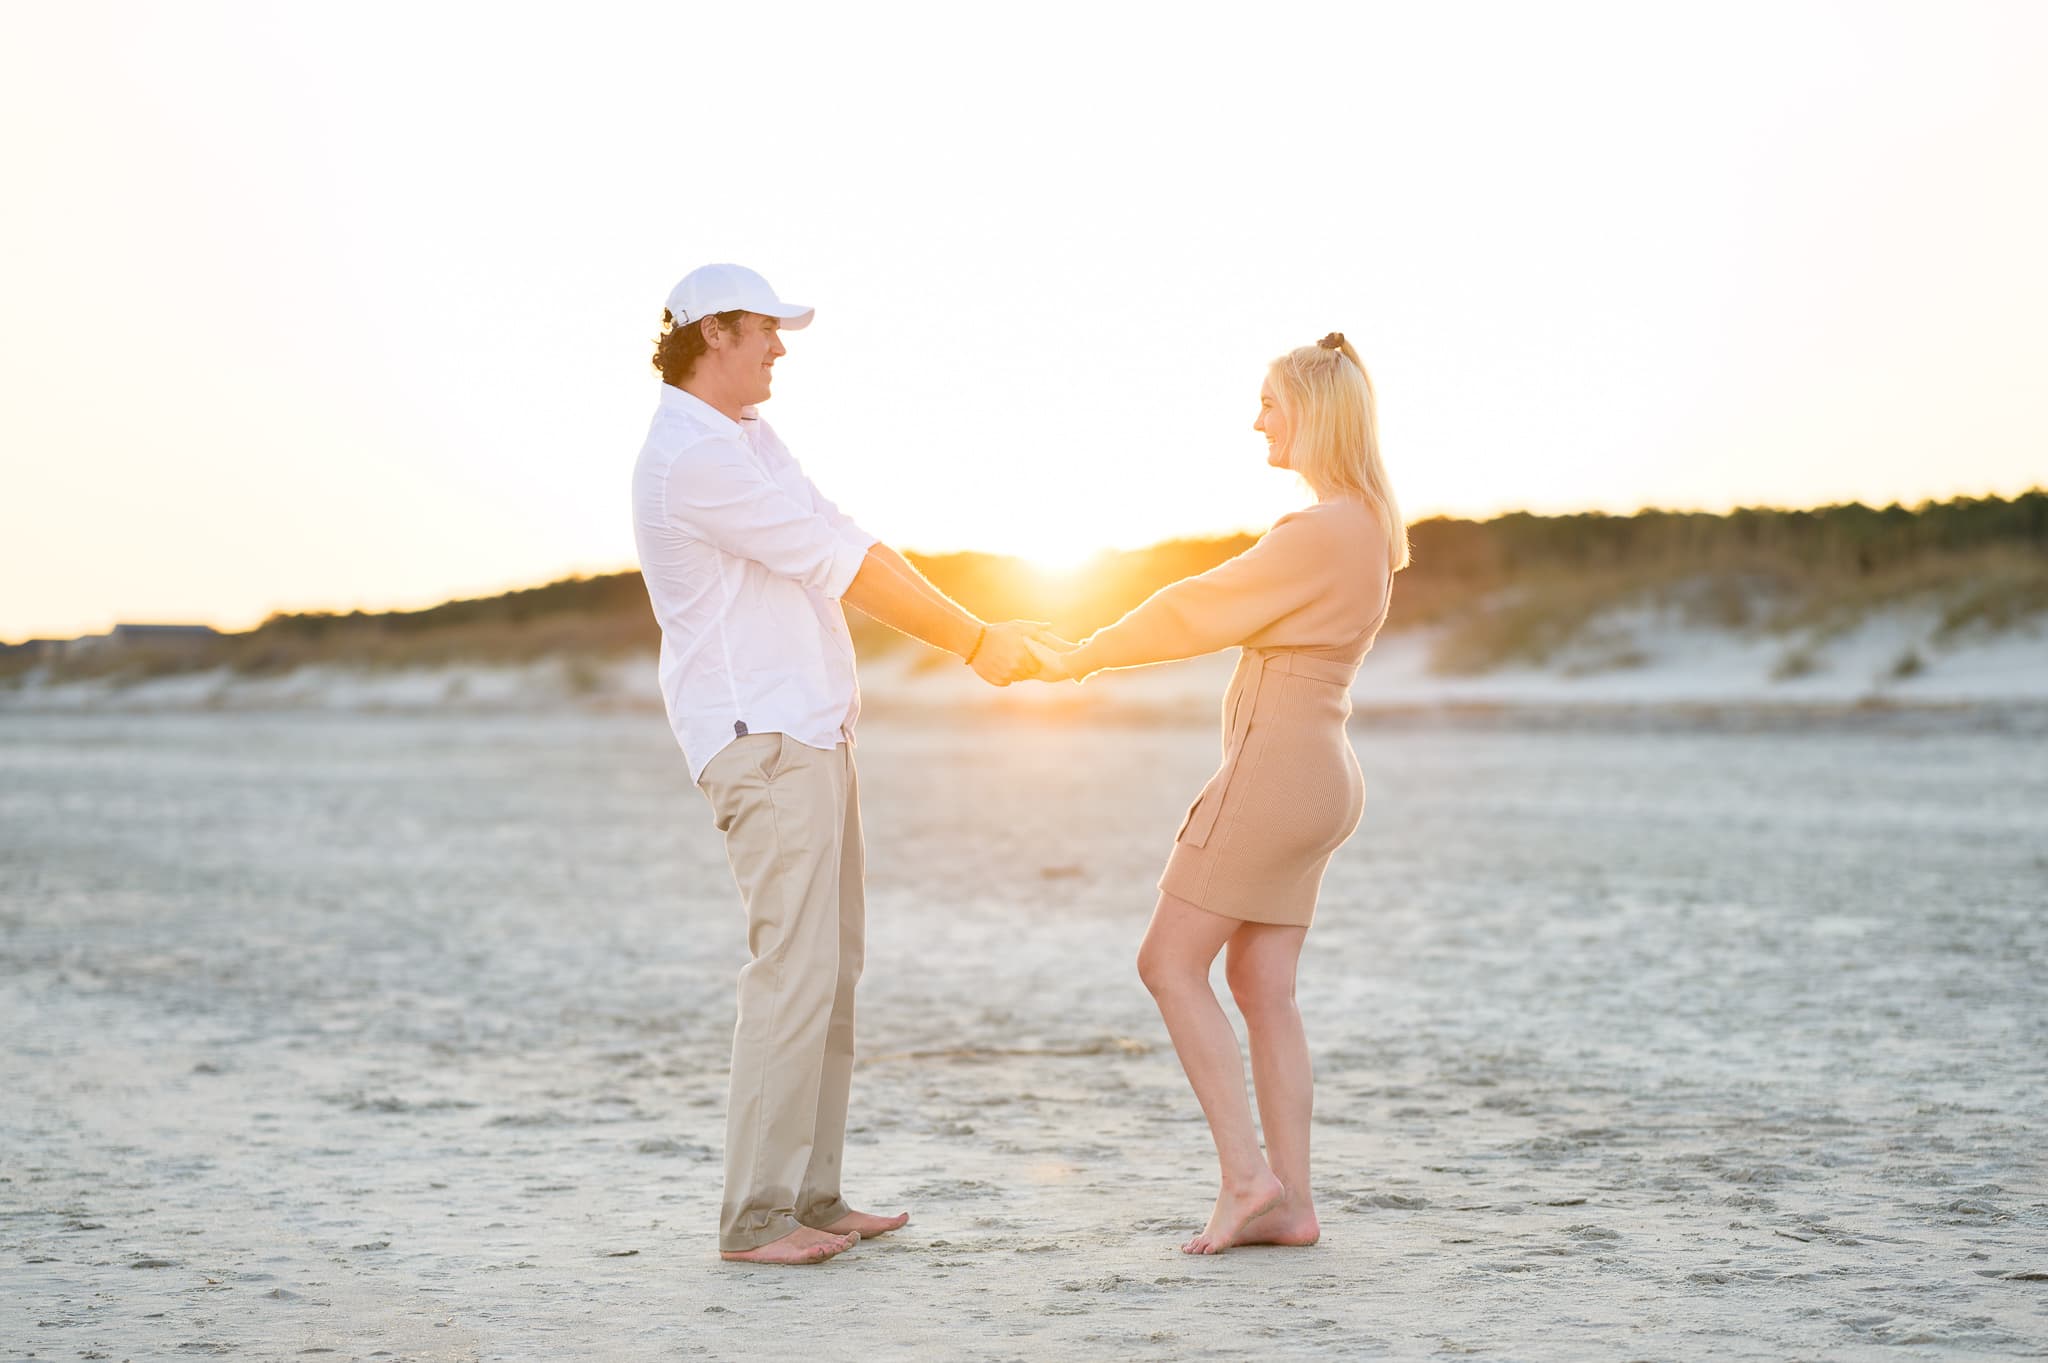 Holding hands in the sunset - Huntington Beach State Park